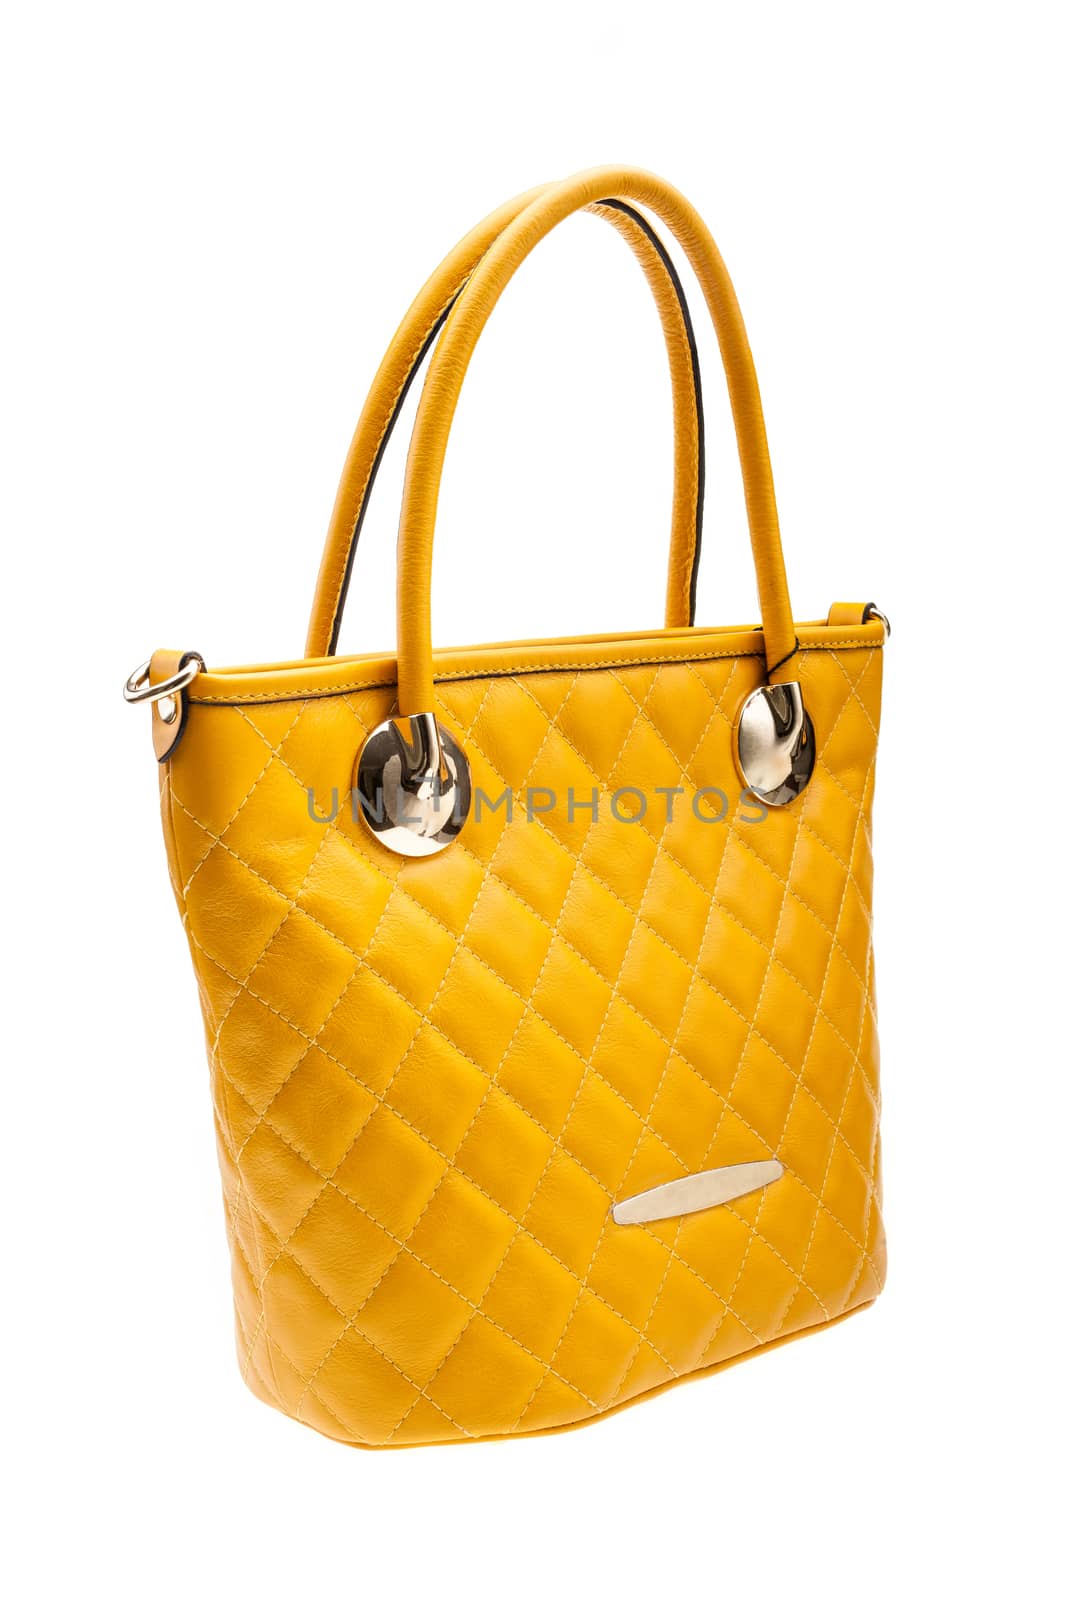 New yellow womens bag isolated on white background.